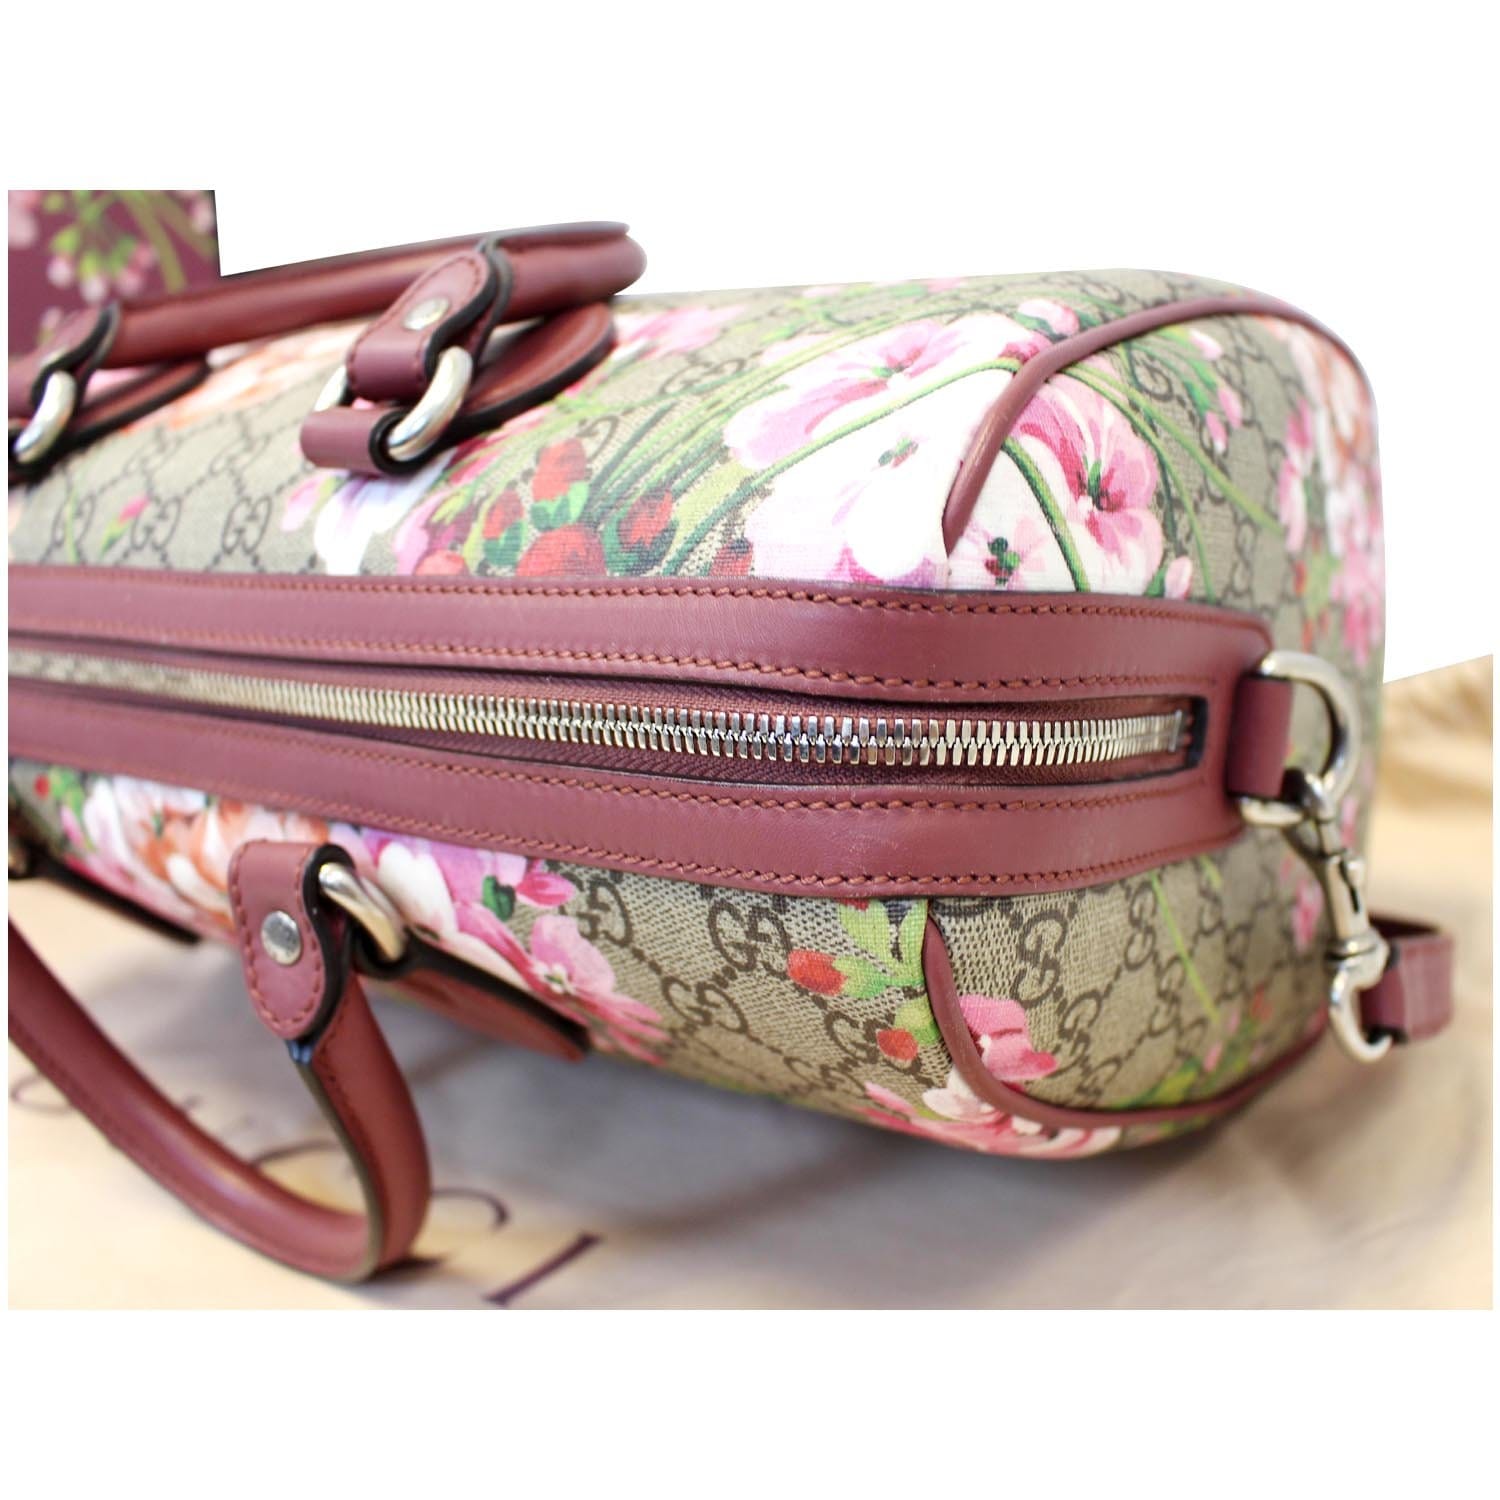 GUCCI Pink GG Supreme Blooms Coated Canvas Medium Top Handle Boston Ba -  The Purse Ladies